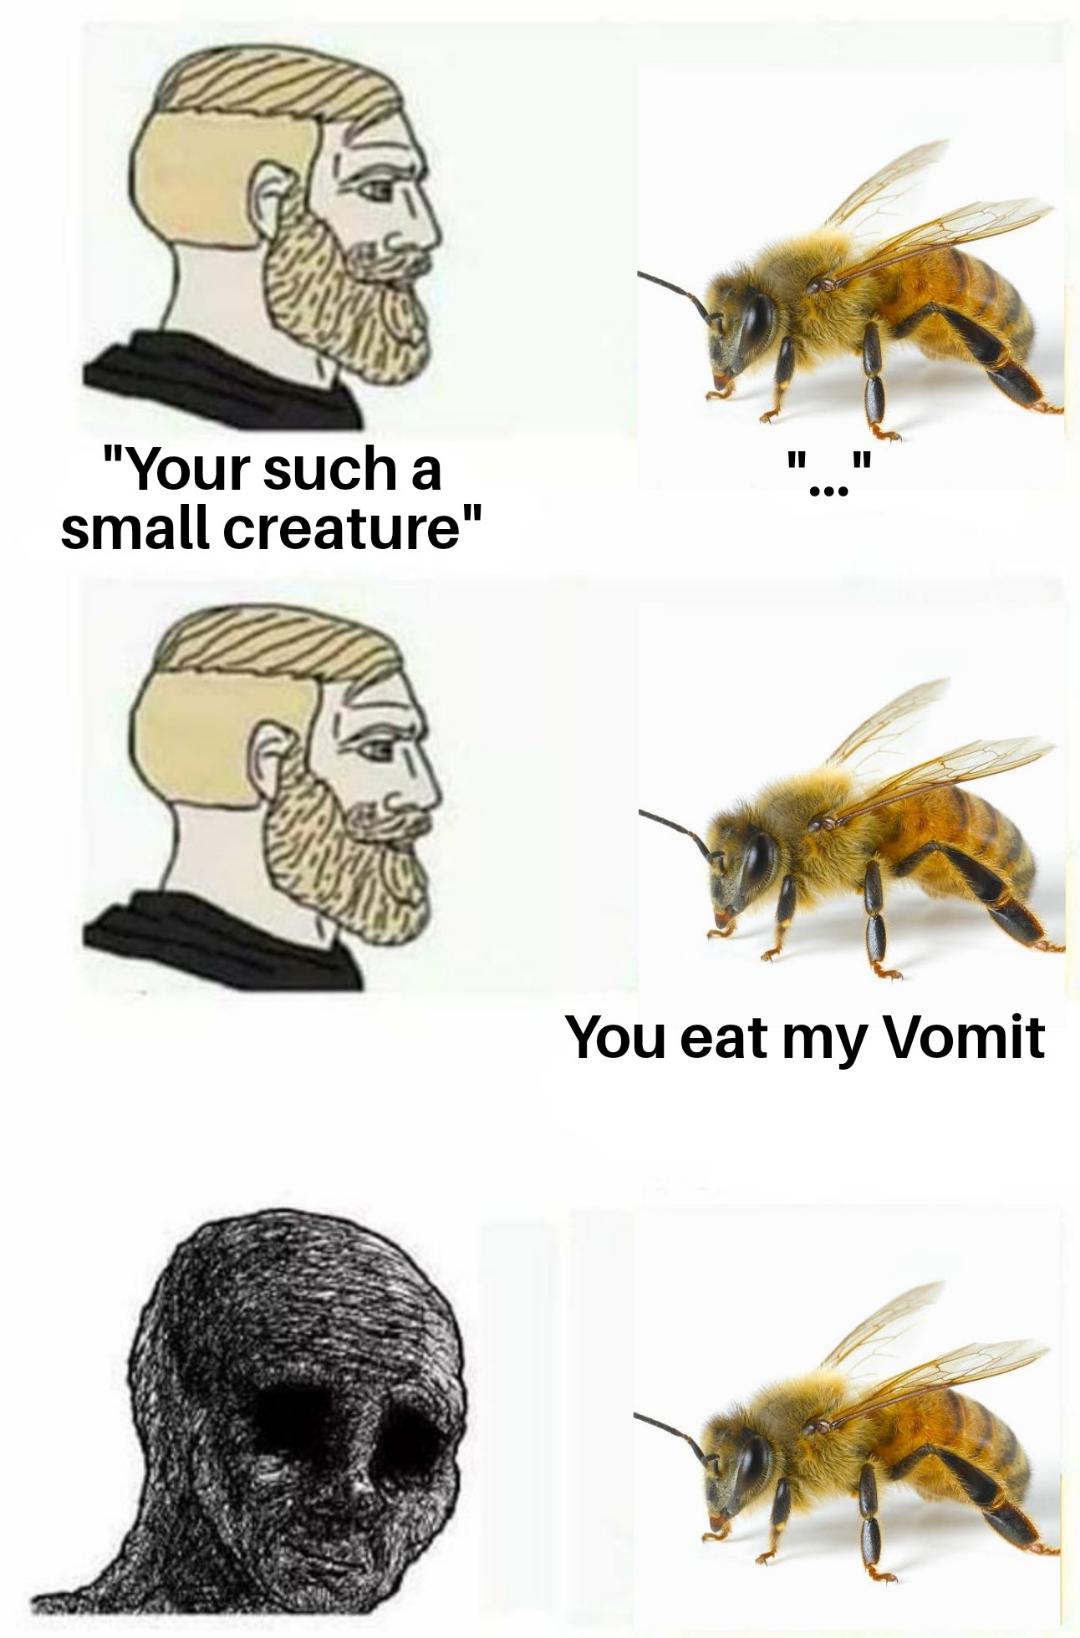 funny memes - dank memes - return to monke vs chad meme - H11 .. "Your such a small creature" You eat my Vomit